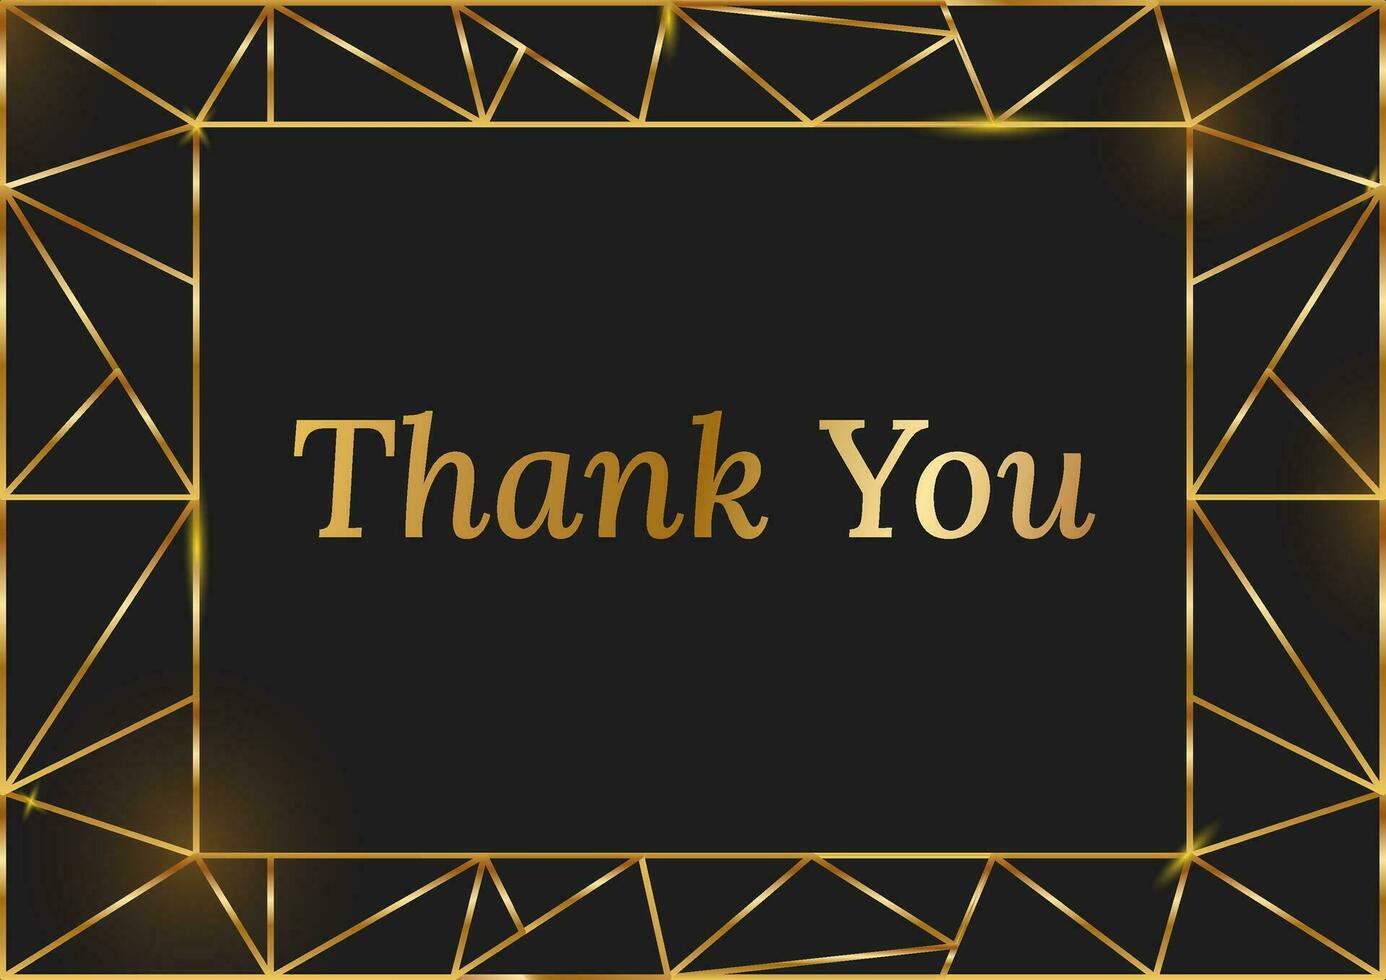 Thank you banner with text on black background with gold frame. suitable for printing, web, advertising vector